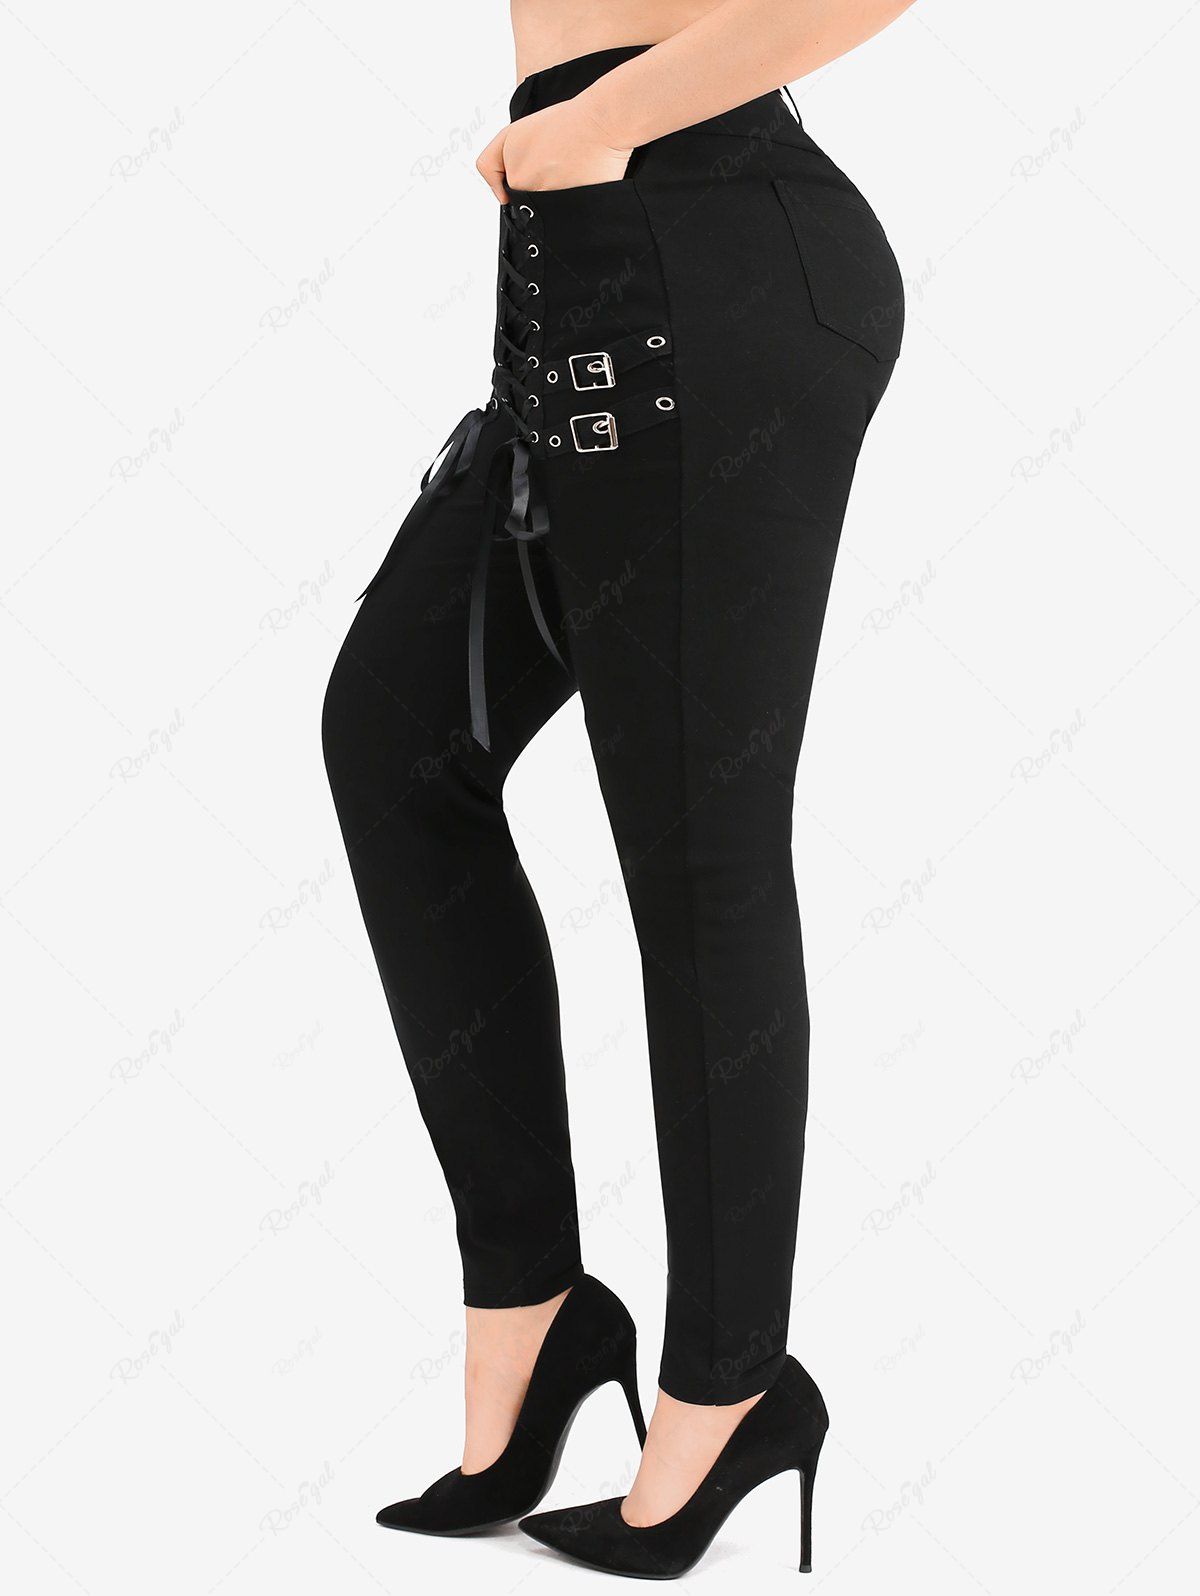 Chic Plus Size Lace Up Pockets Buckle Pull On Leggings  